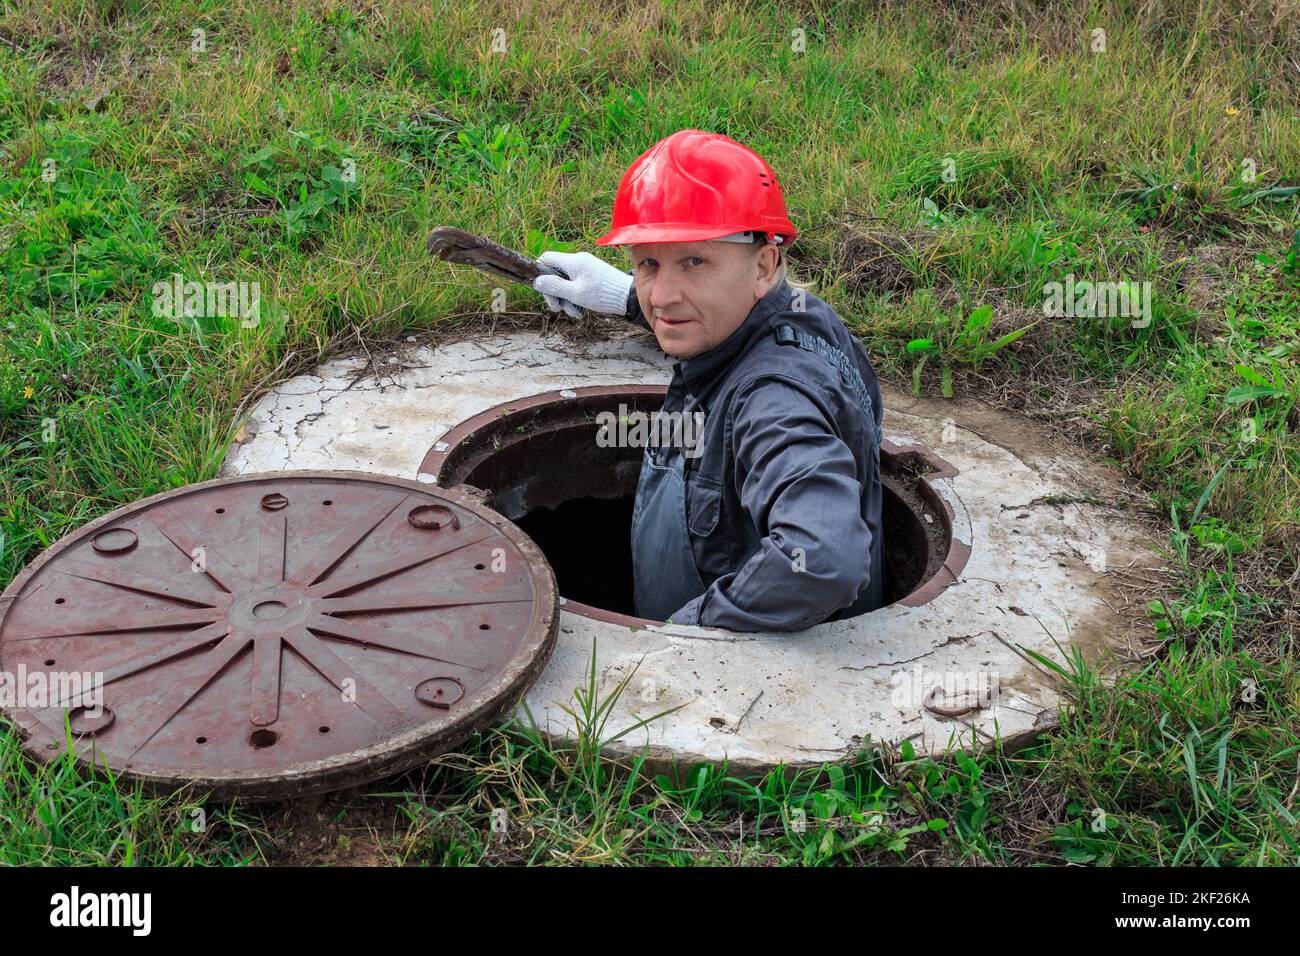 A male plumber in a helmet descended into an open water well for inspection and repair. Stock Photo